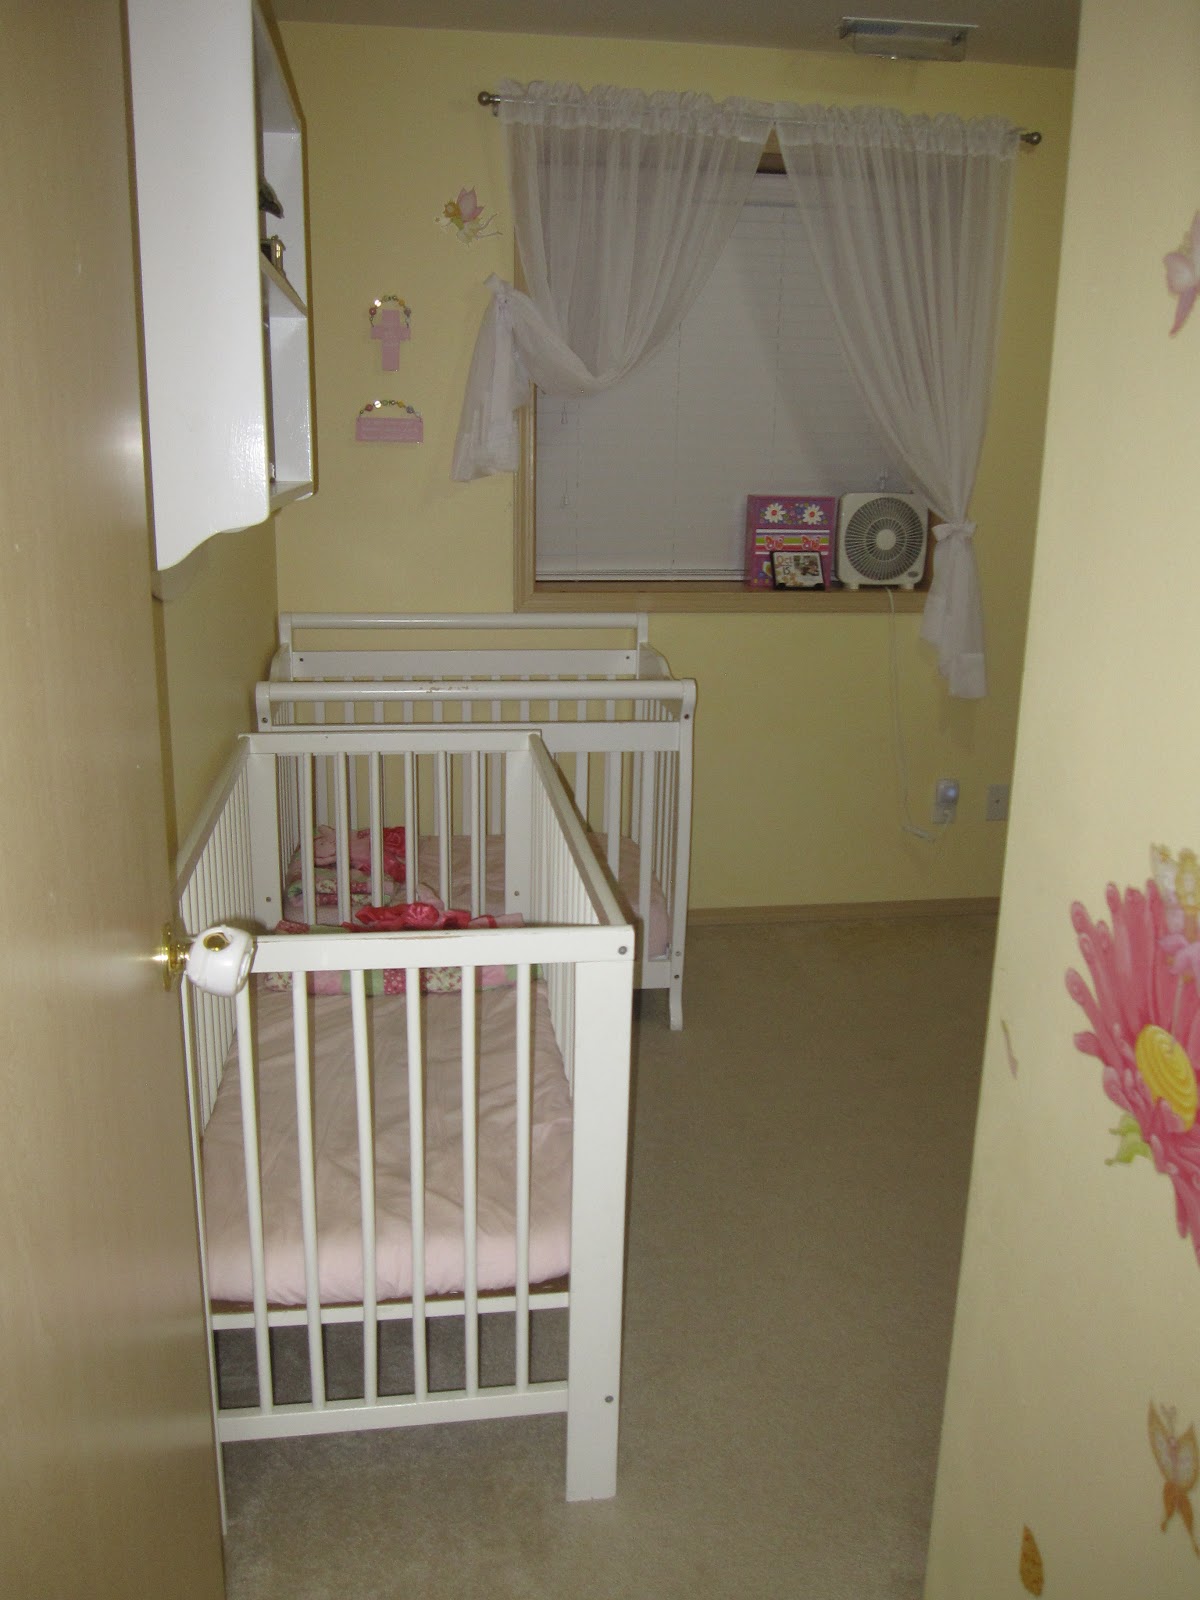 White Painted Baby Simple White Painted Wooden Best Baby Cribs Placed Inside Bright Cream Painted Nursery Room With Pink Splash Kids Room Marvelous Best Baby Cribs Designed In Twins Model For Small Room